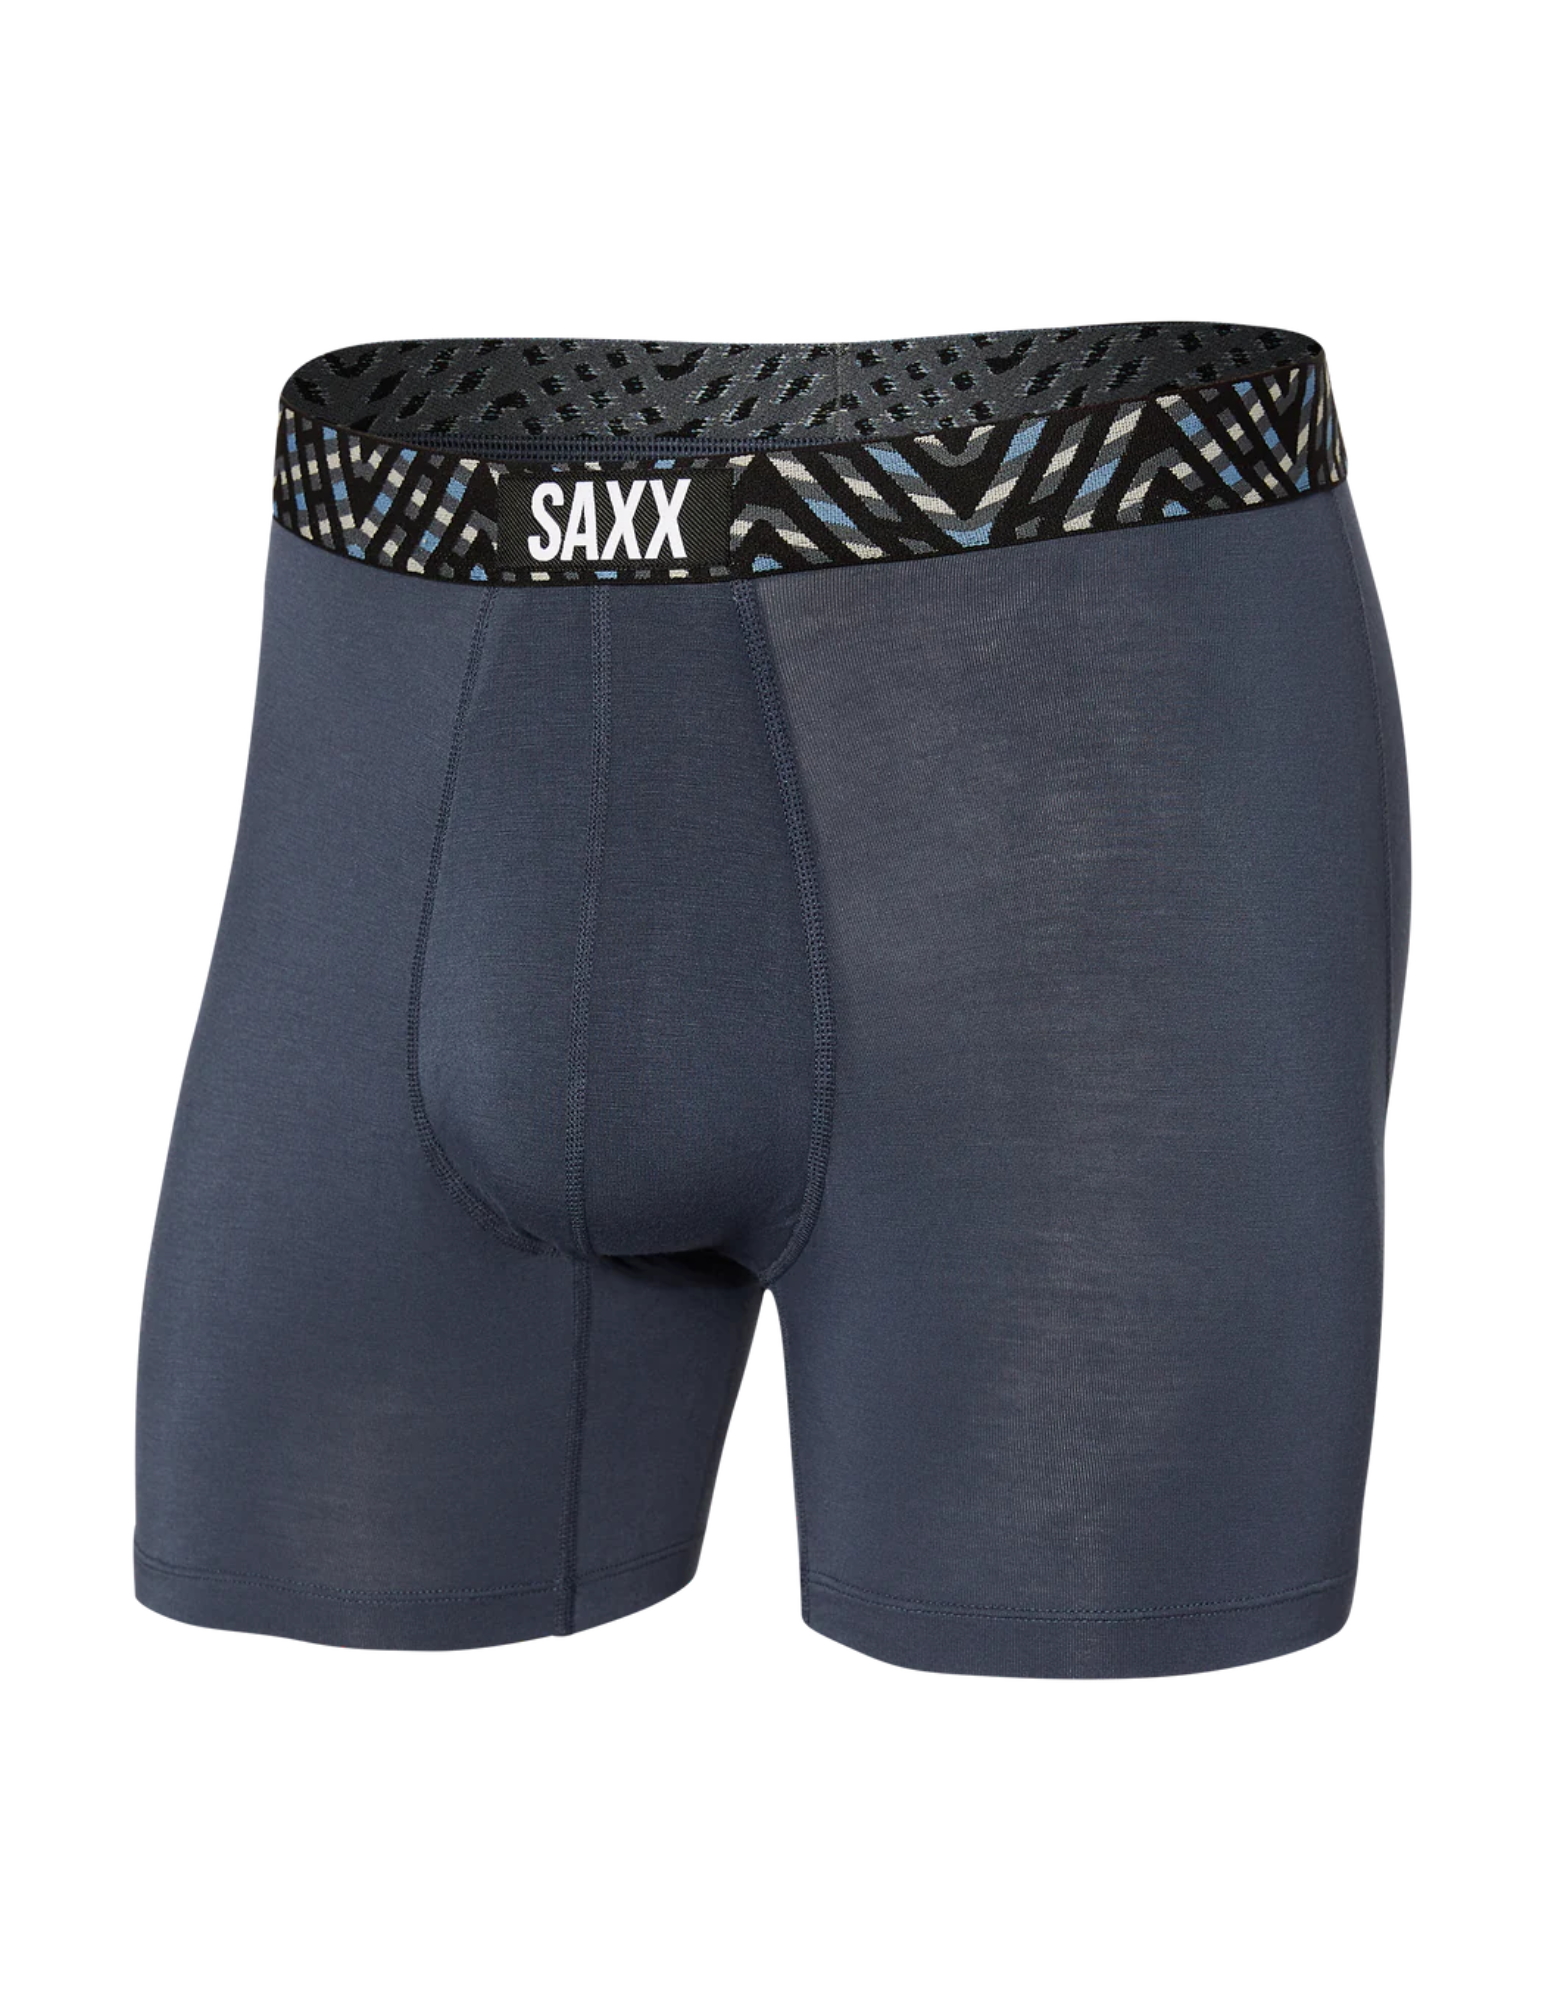 Made For The guy who wants to give his balls a boost. This best-selling style is cut from a breathable fabric that’s so soft you won’t want to take it off.